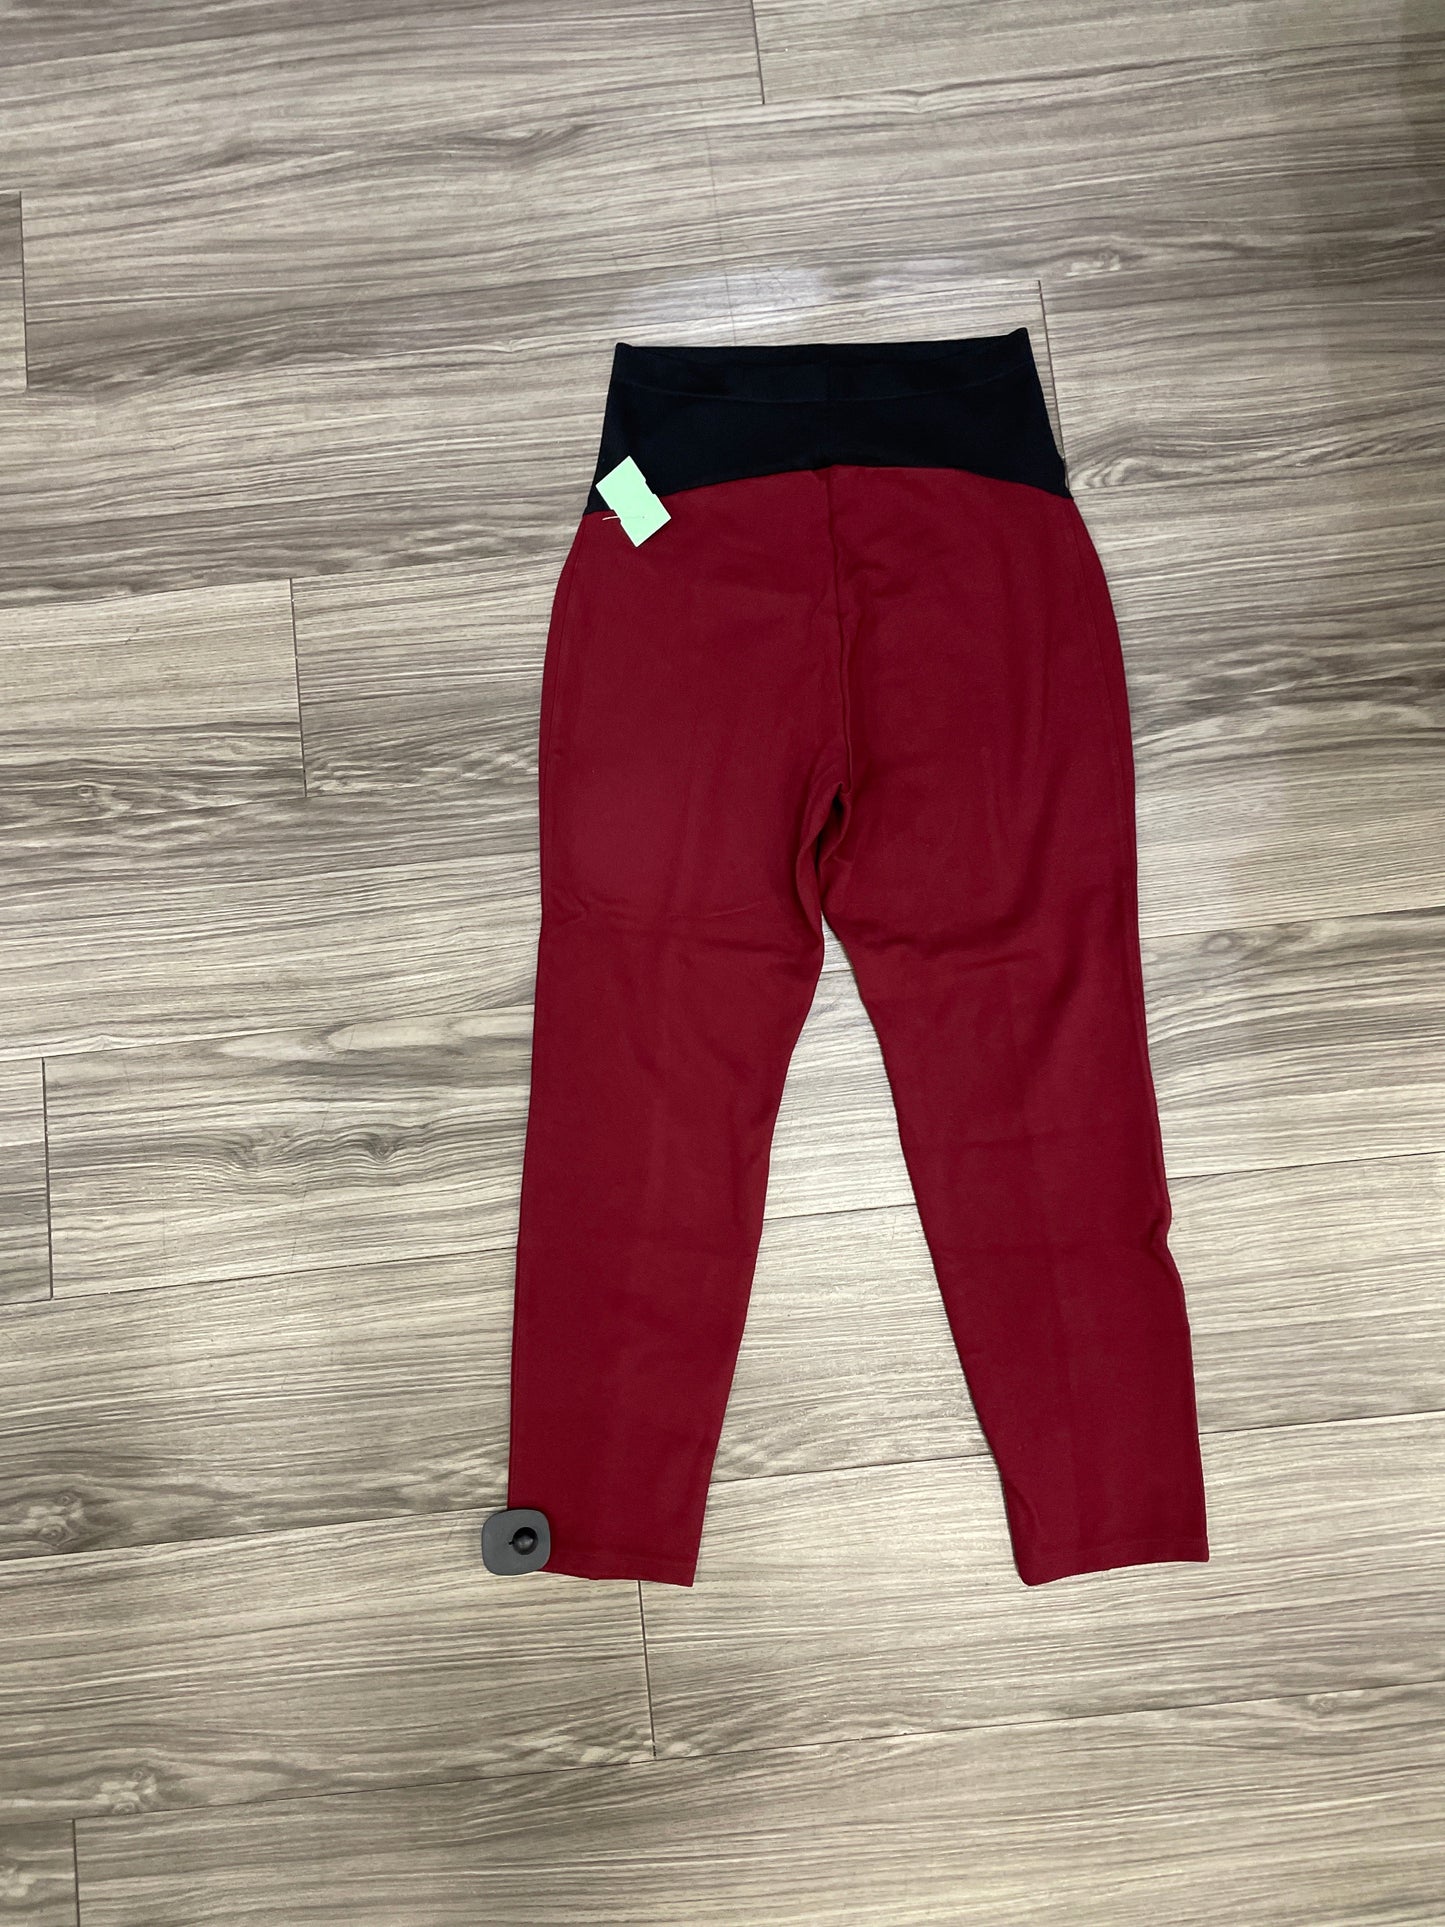 Maternity Athletic Leggings Old Navy, Size L